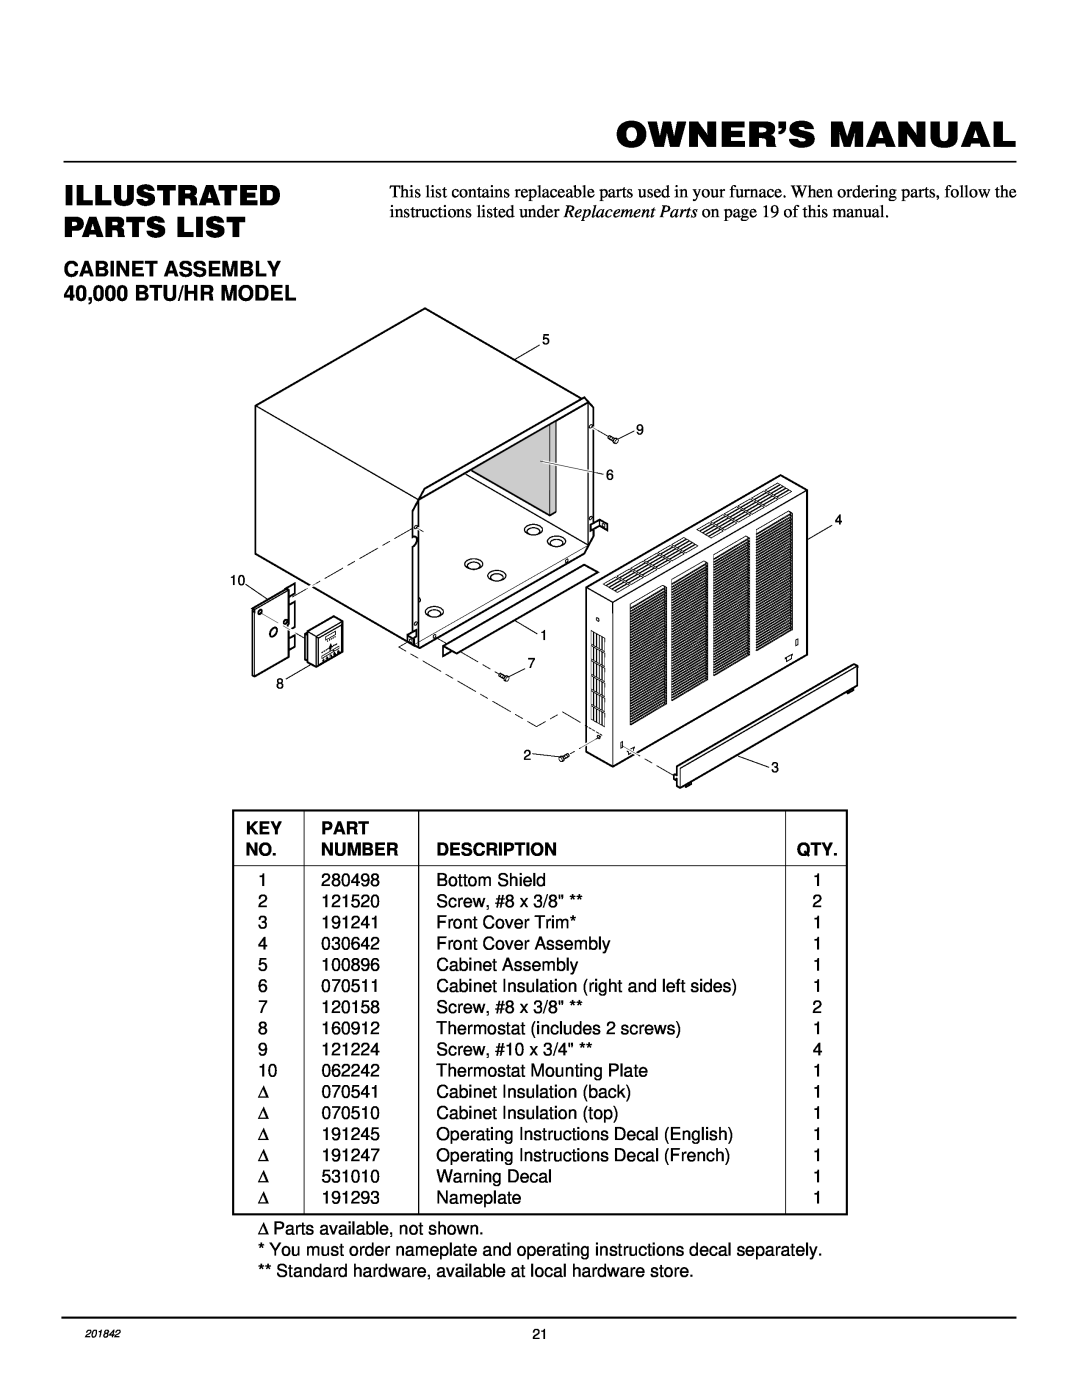 Williams 4003532, 2503532 installation manual Owner’S Manual, Illustrated Parts List, CABINET ASSEMBLY 40,000 BTU/HR MODEL 